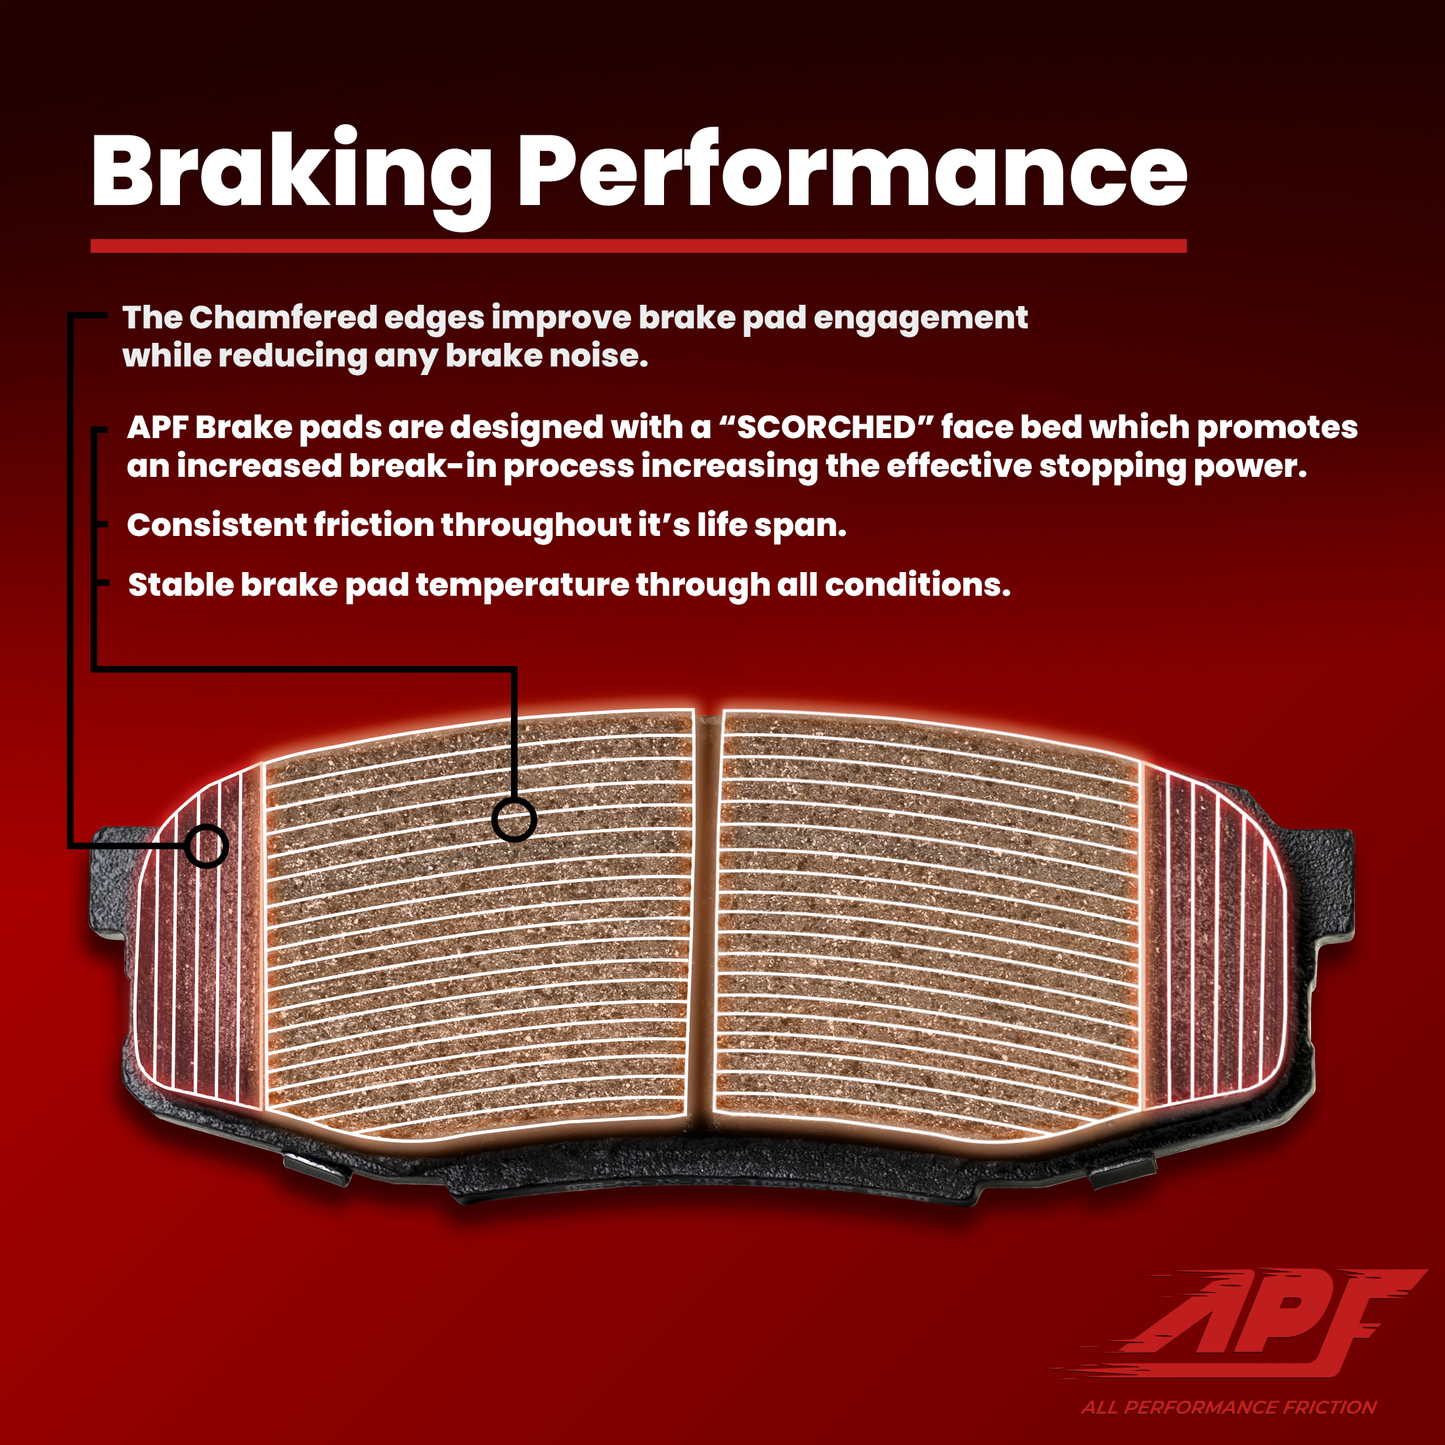 APF All Performance Friction Front and Rear Rotors and Pads Full Kit compatible with Volkswagen Passat 2006-2008 Zinc Drilled Slotted Rotors with Ceramic Carbon Fiber Brake Pads | $474.97